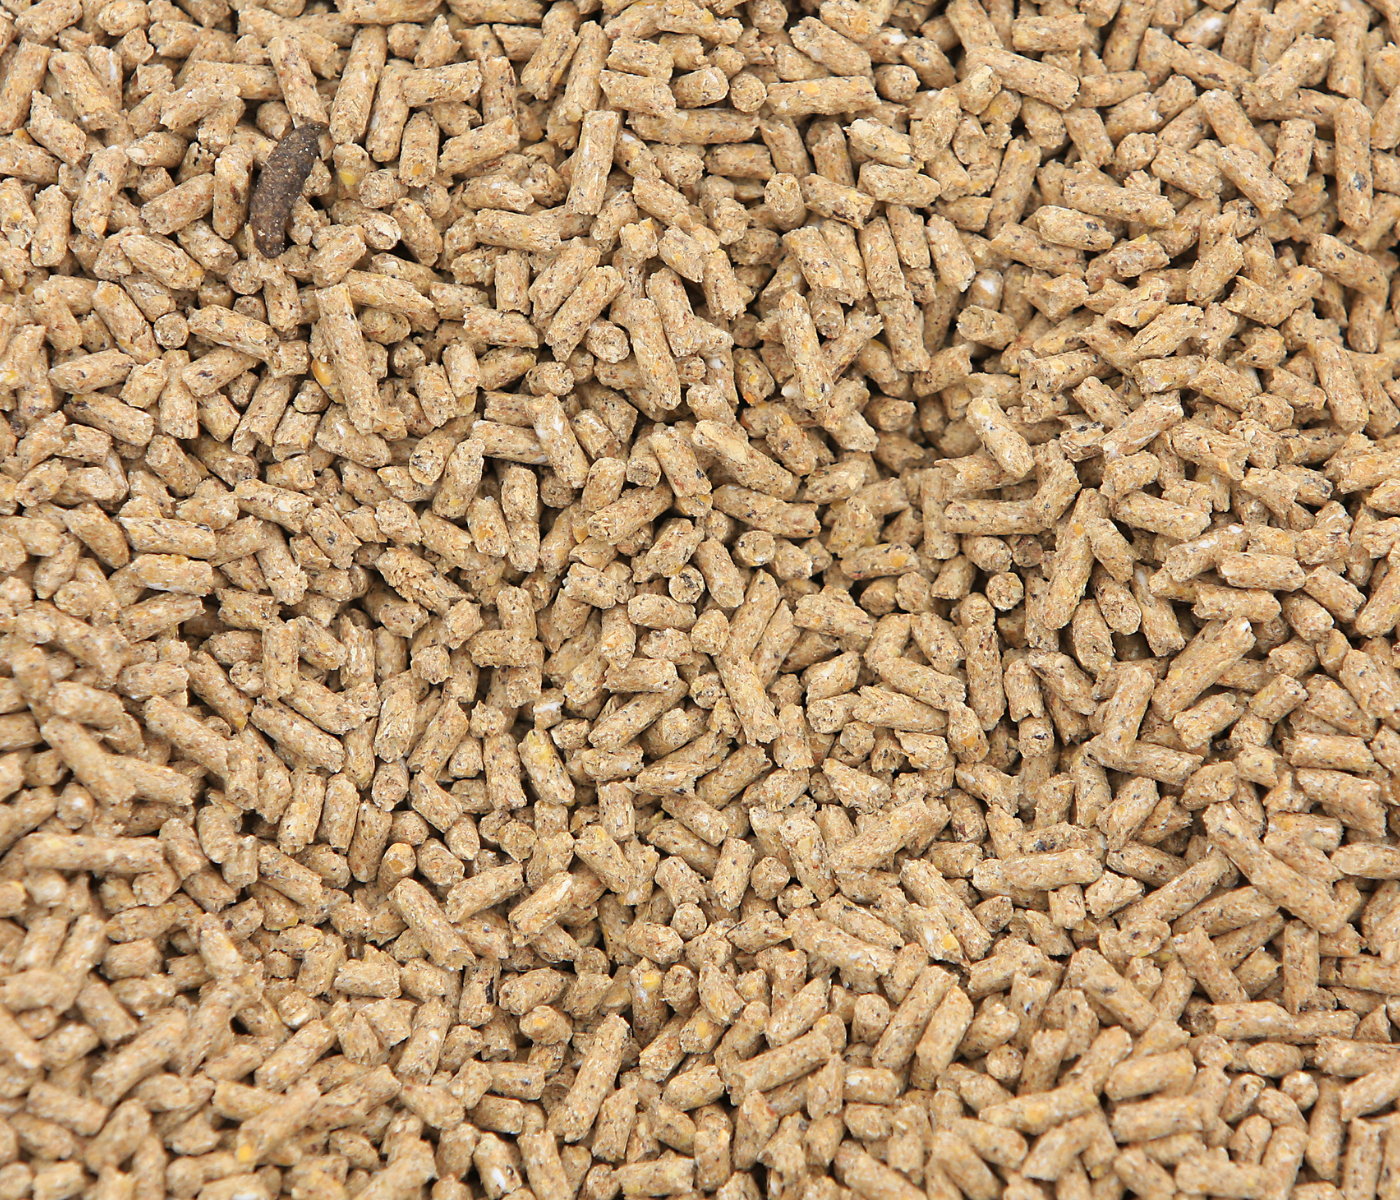 Insect meal as a feed ingredient for poultry